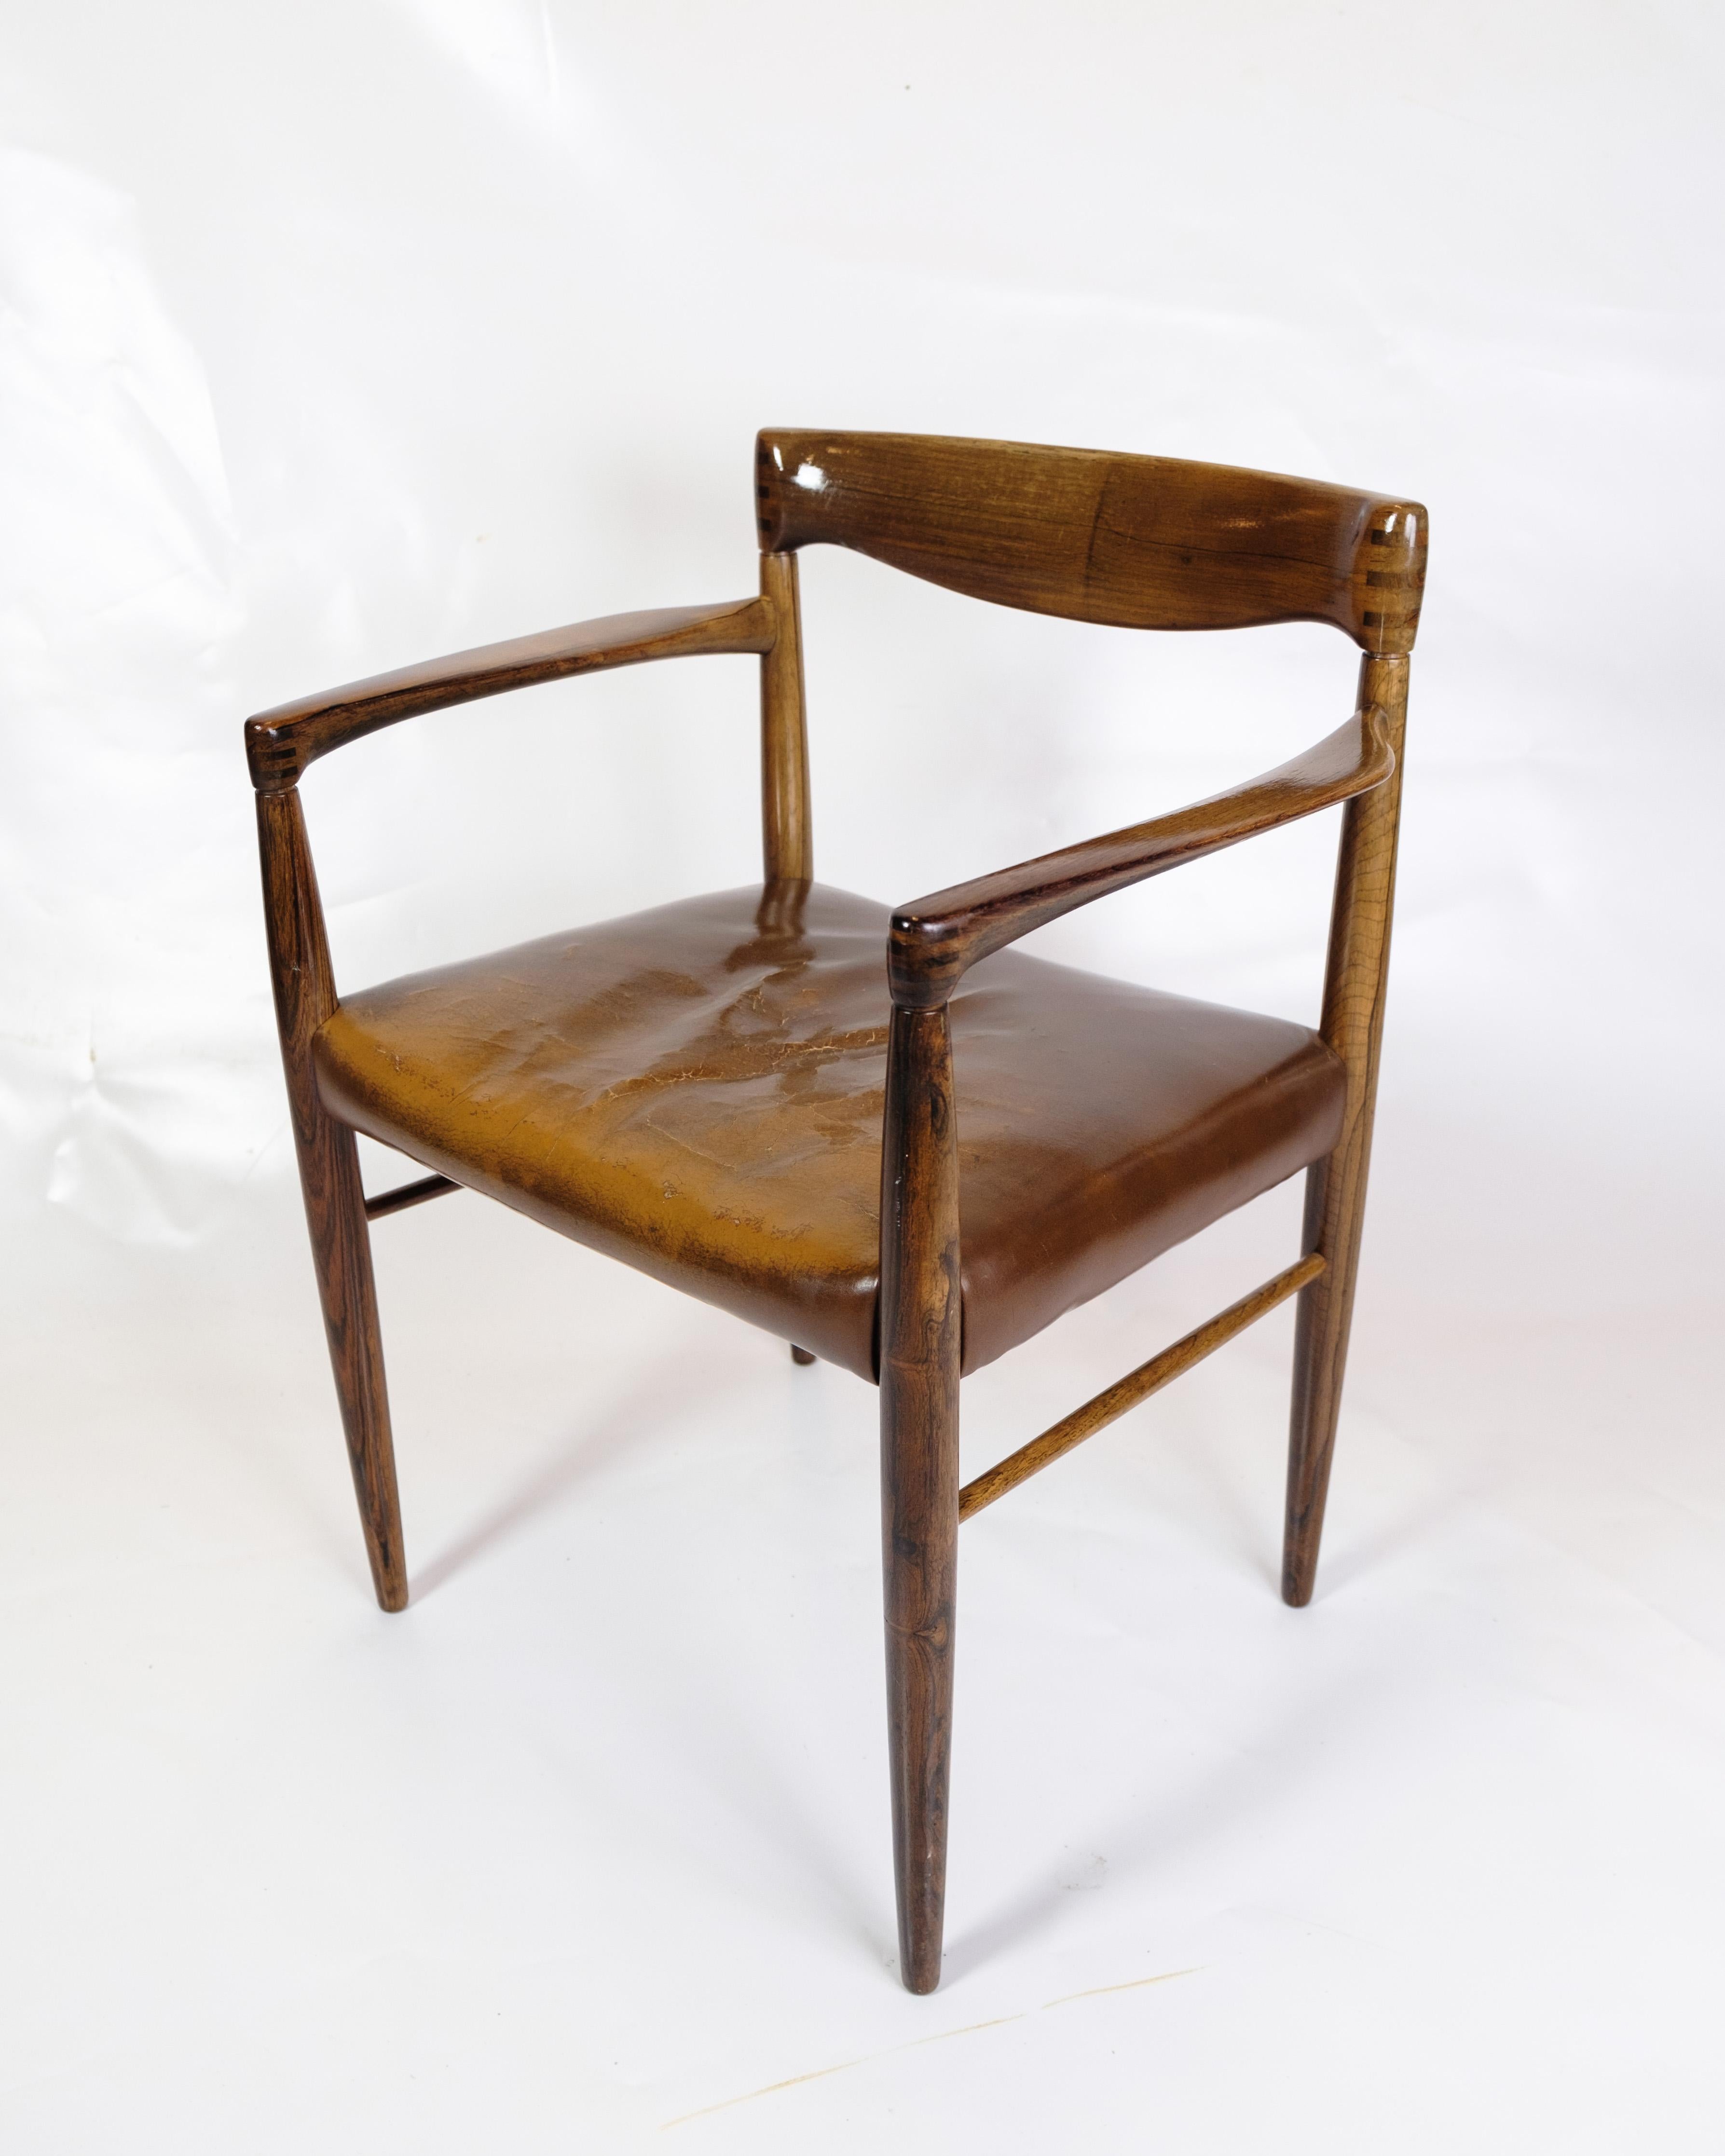 This armchair is a fine example of Danish furniture art from the 1960s, designed by Henry W. Klein and manufactured by Bramin. With its rosewood frame and cognac leather seat, this chair exudes timeless elegance and exceptional craftsmanship.

Henry